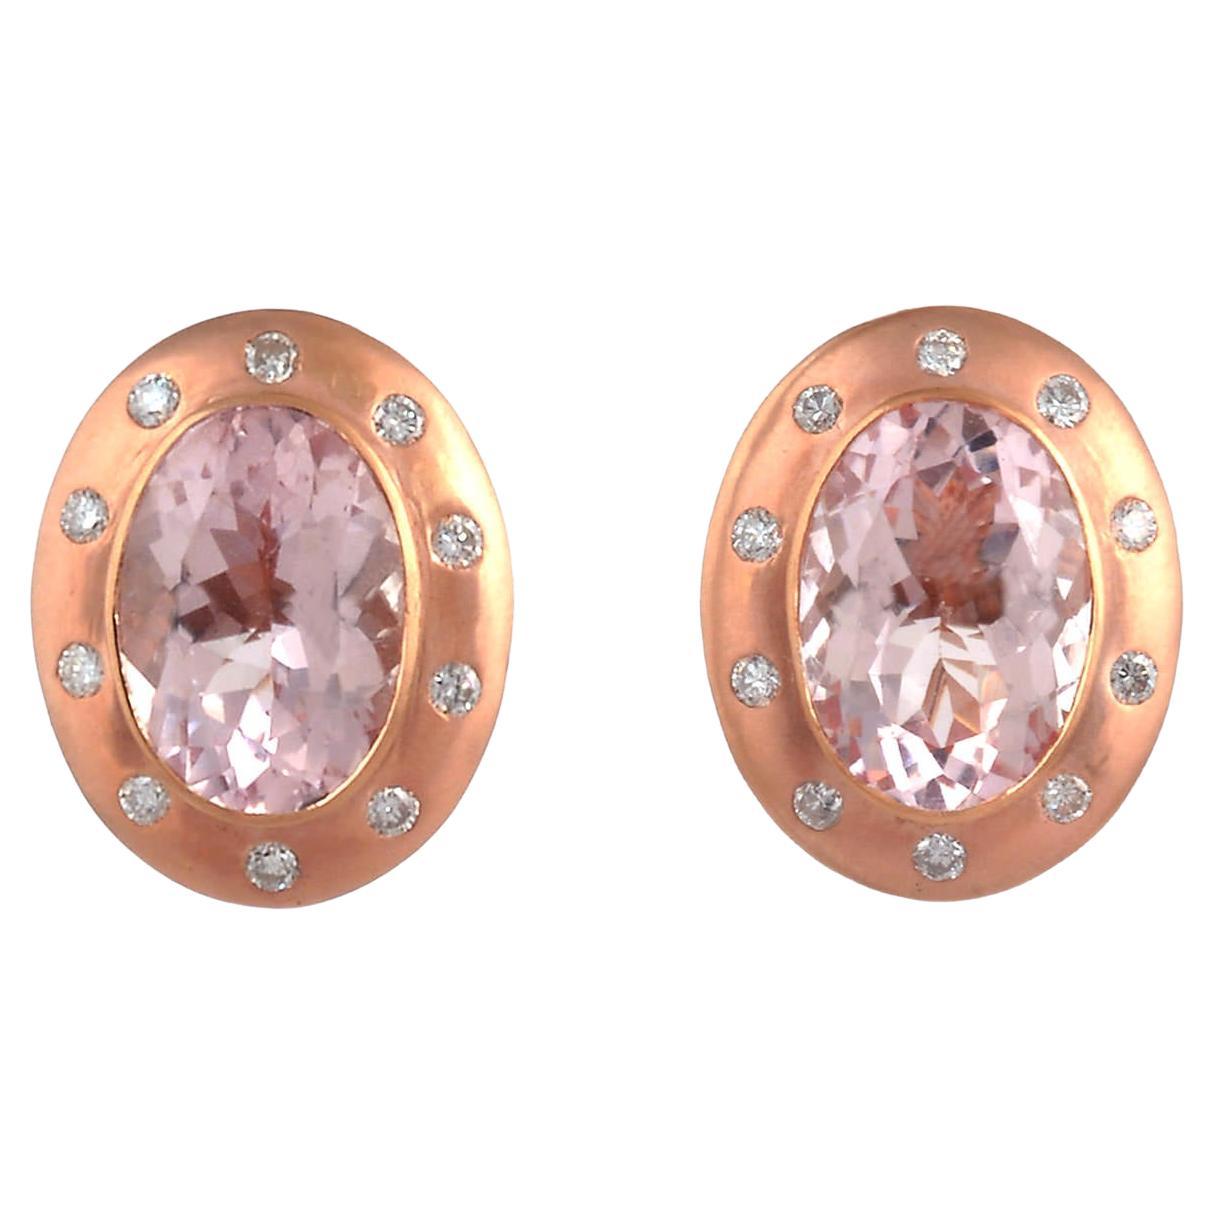 Morganite Stud Earring With Diamonds Made In 18k Rose Gold For Sale